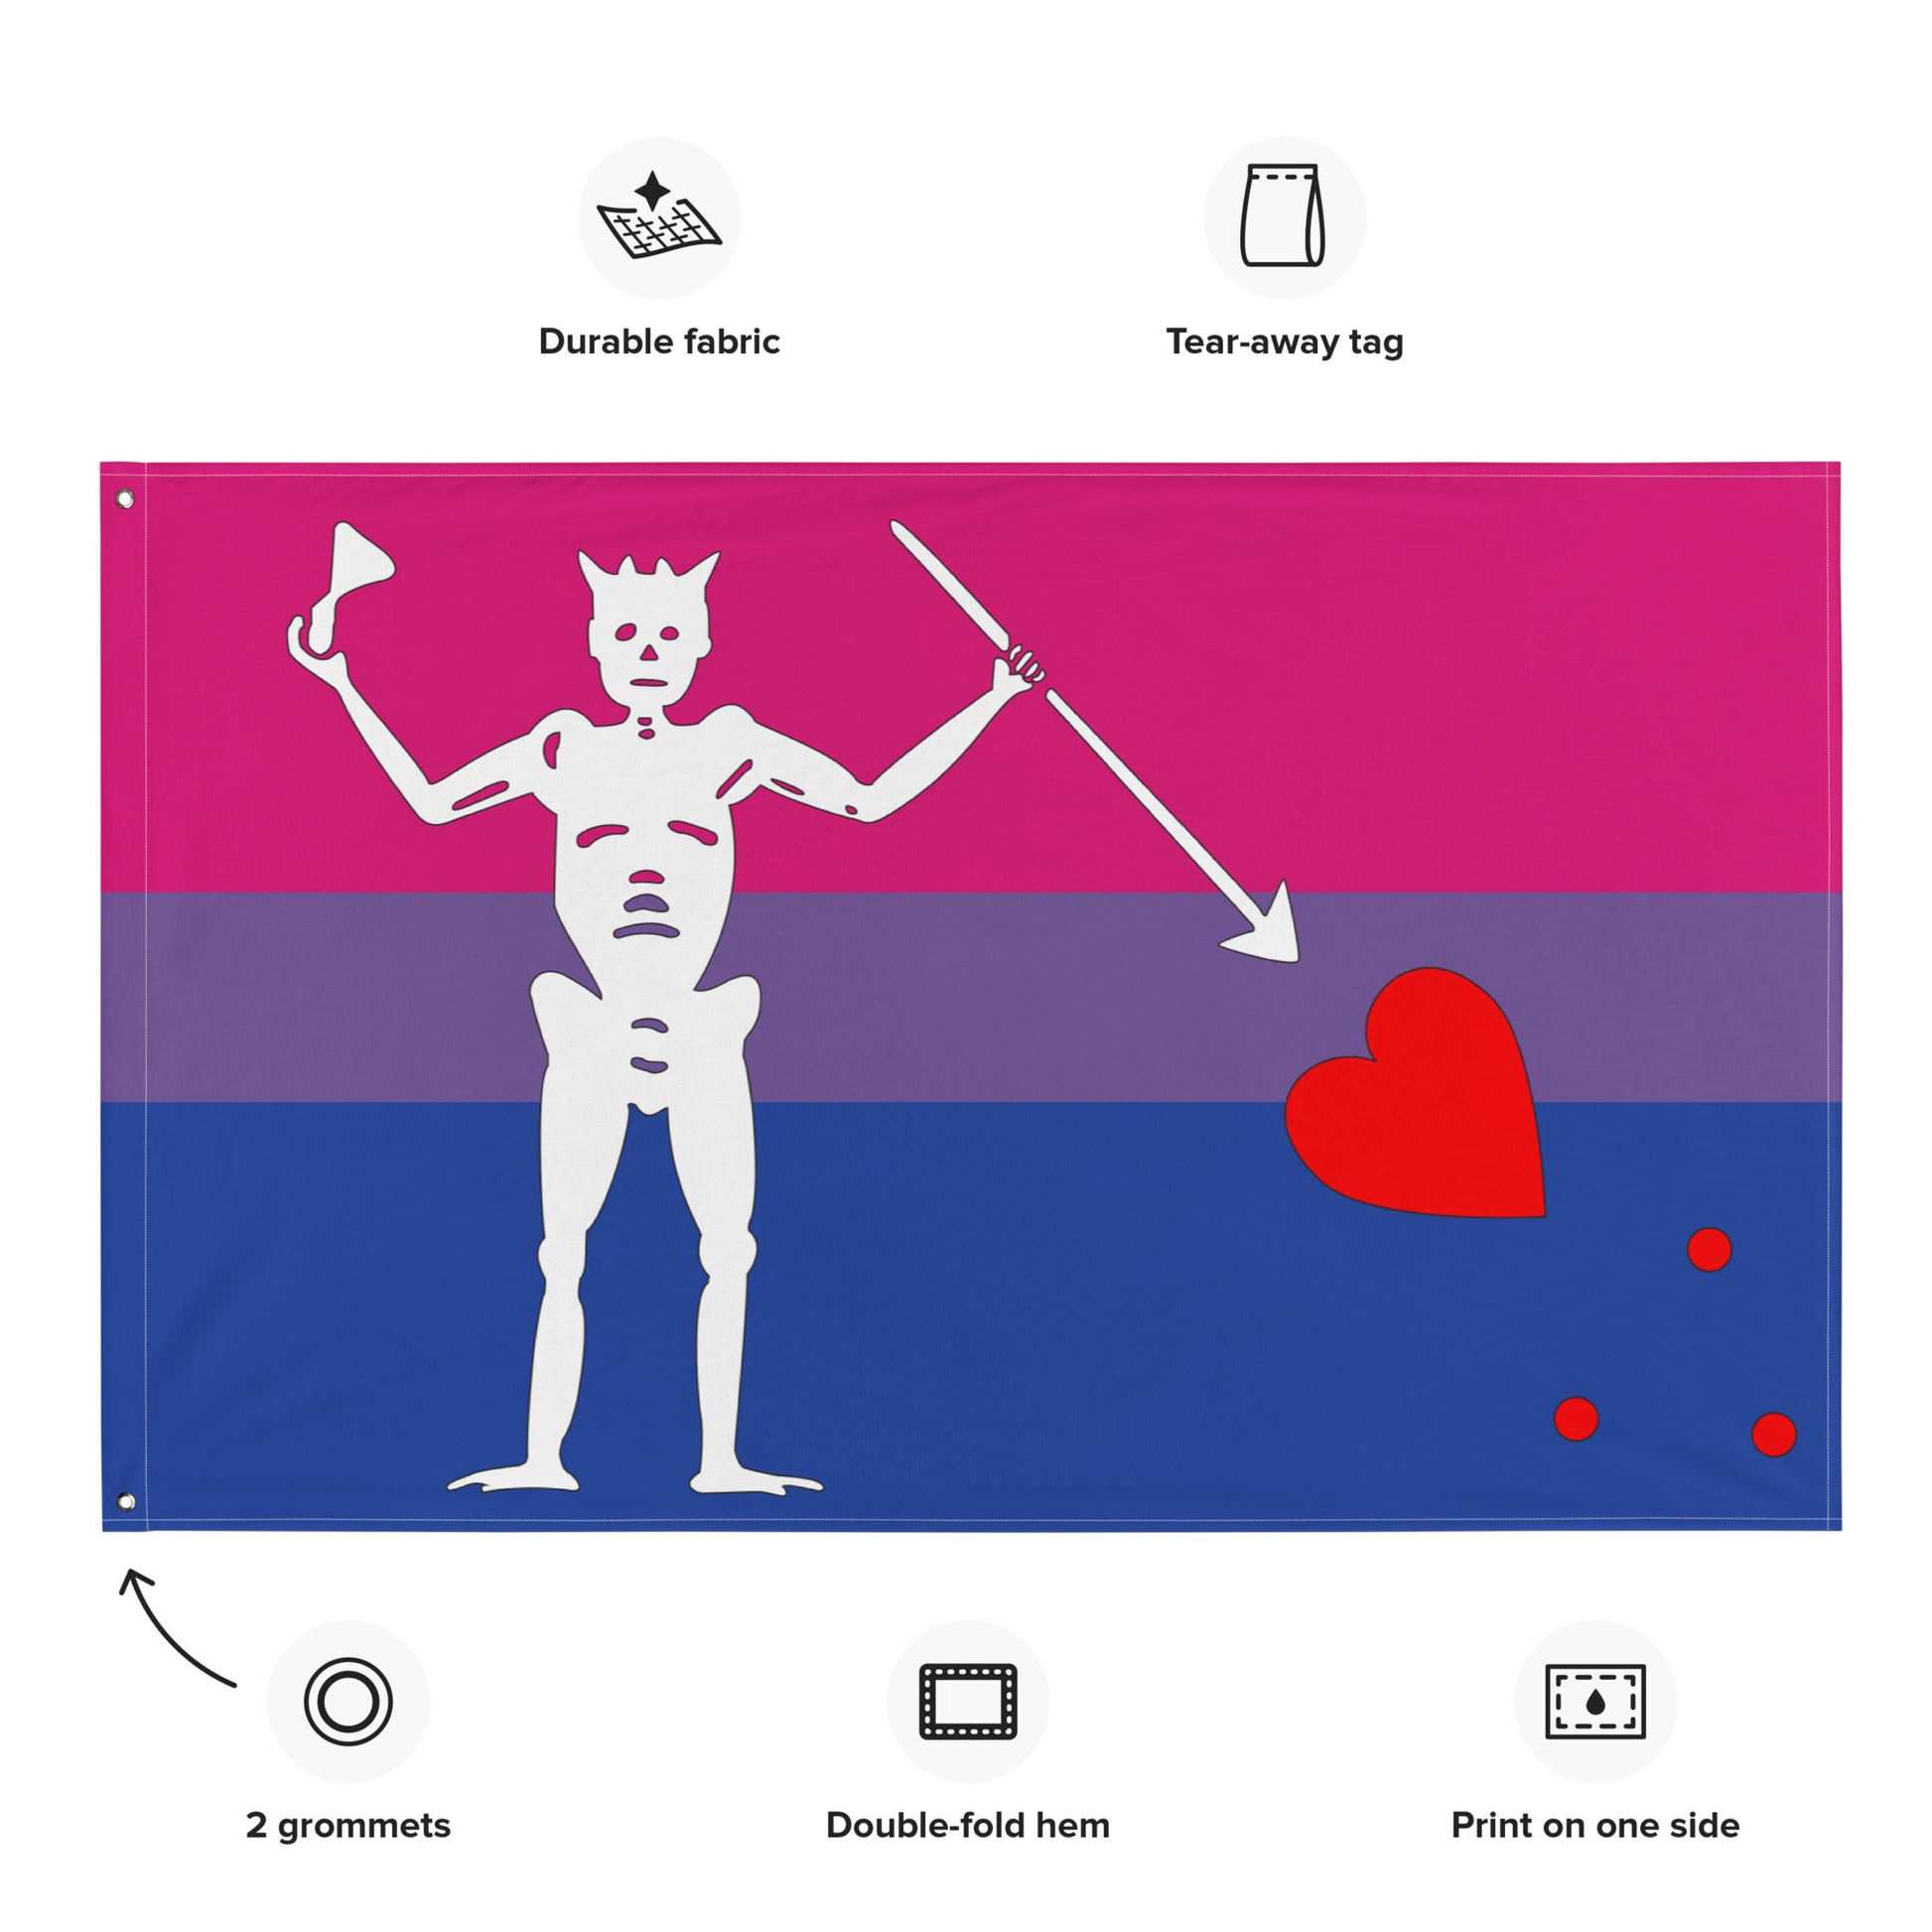 the bisexual flag with blackbeard's symbol surrounded by the specifications of "durable fabric, tear-away tag, 2 grommets, double-fold hem, print on one side"